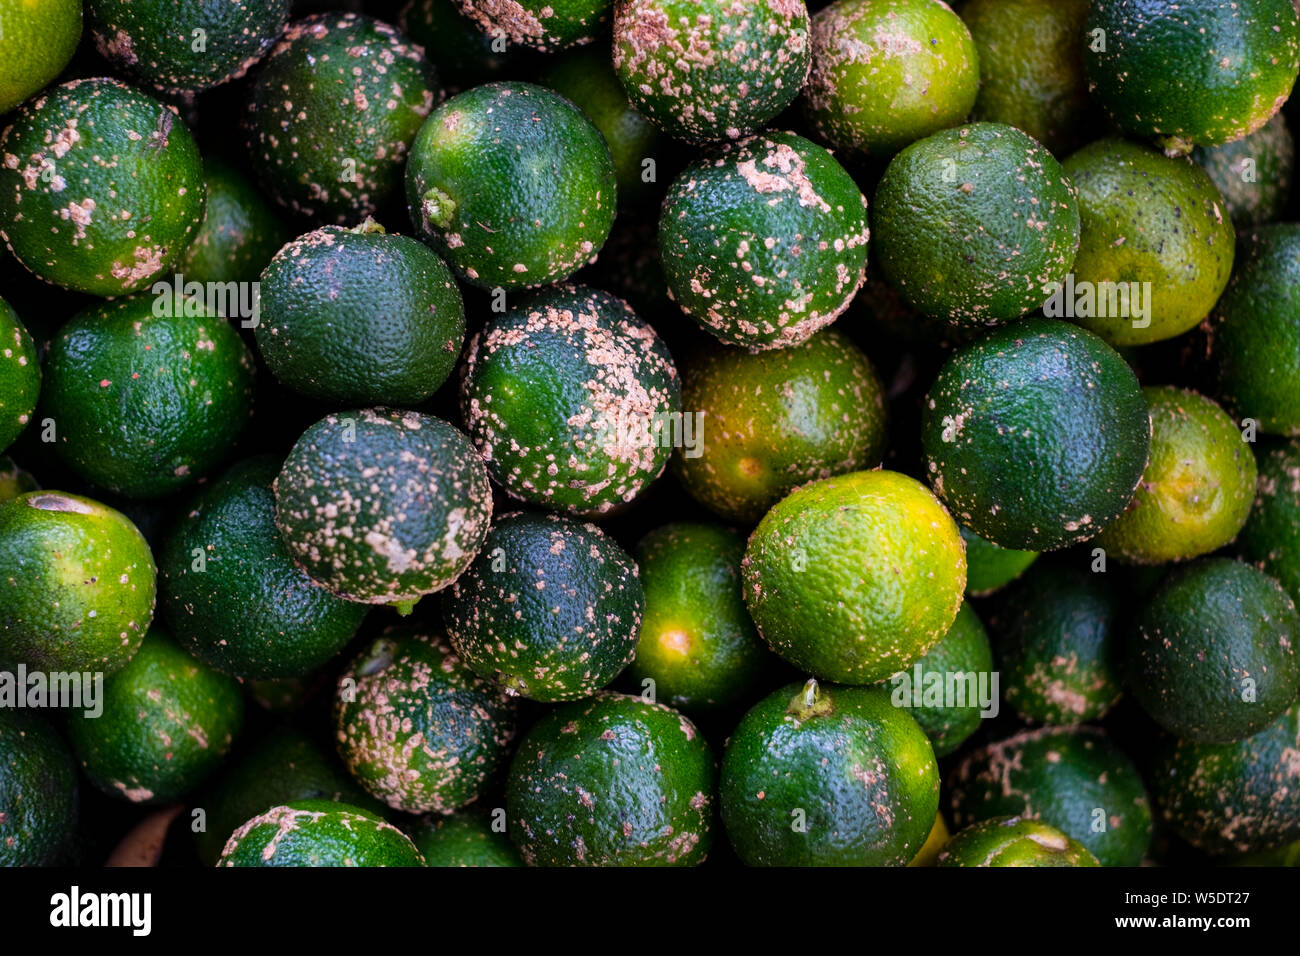 Filled frame of organic and juicy calamansi (AKA citrus microcarpa, calamondin or Philippine lime), used for lemonade and cooking. Selective focus. Stock Photo